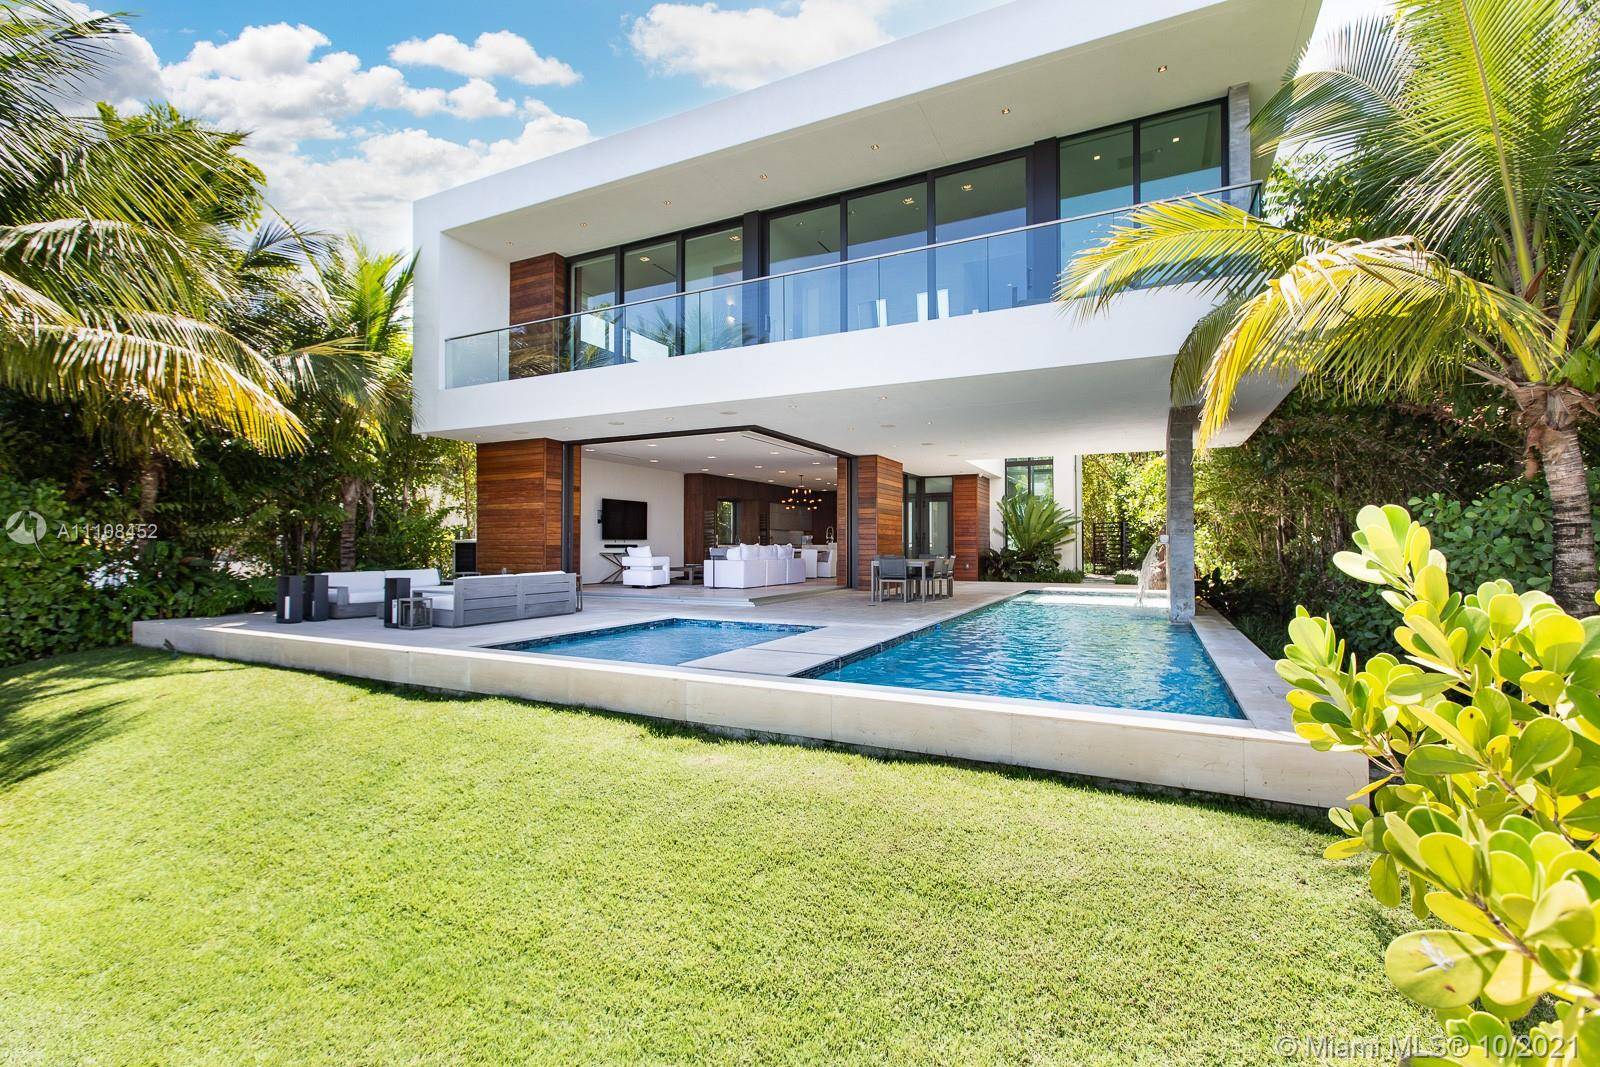 Welcome home to your very own furnished tropical waterfront estate.